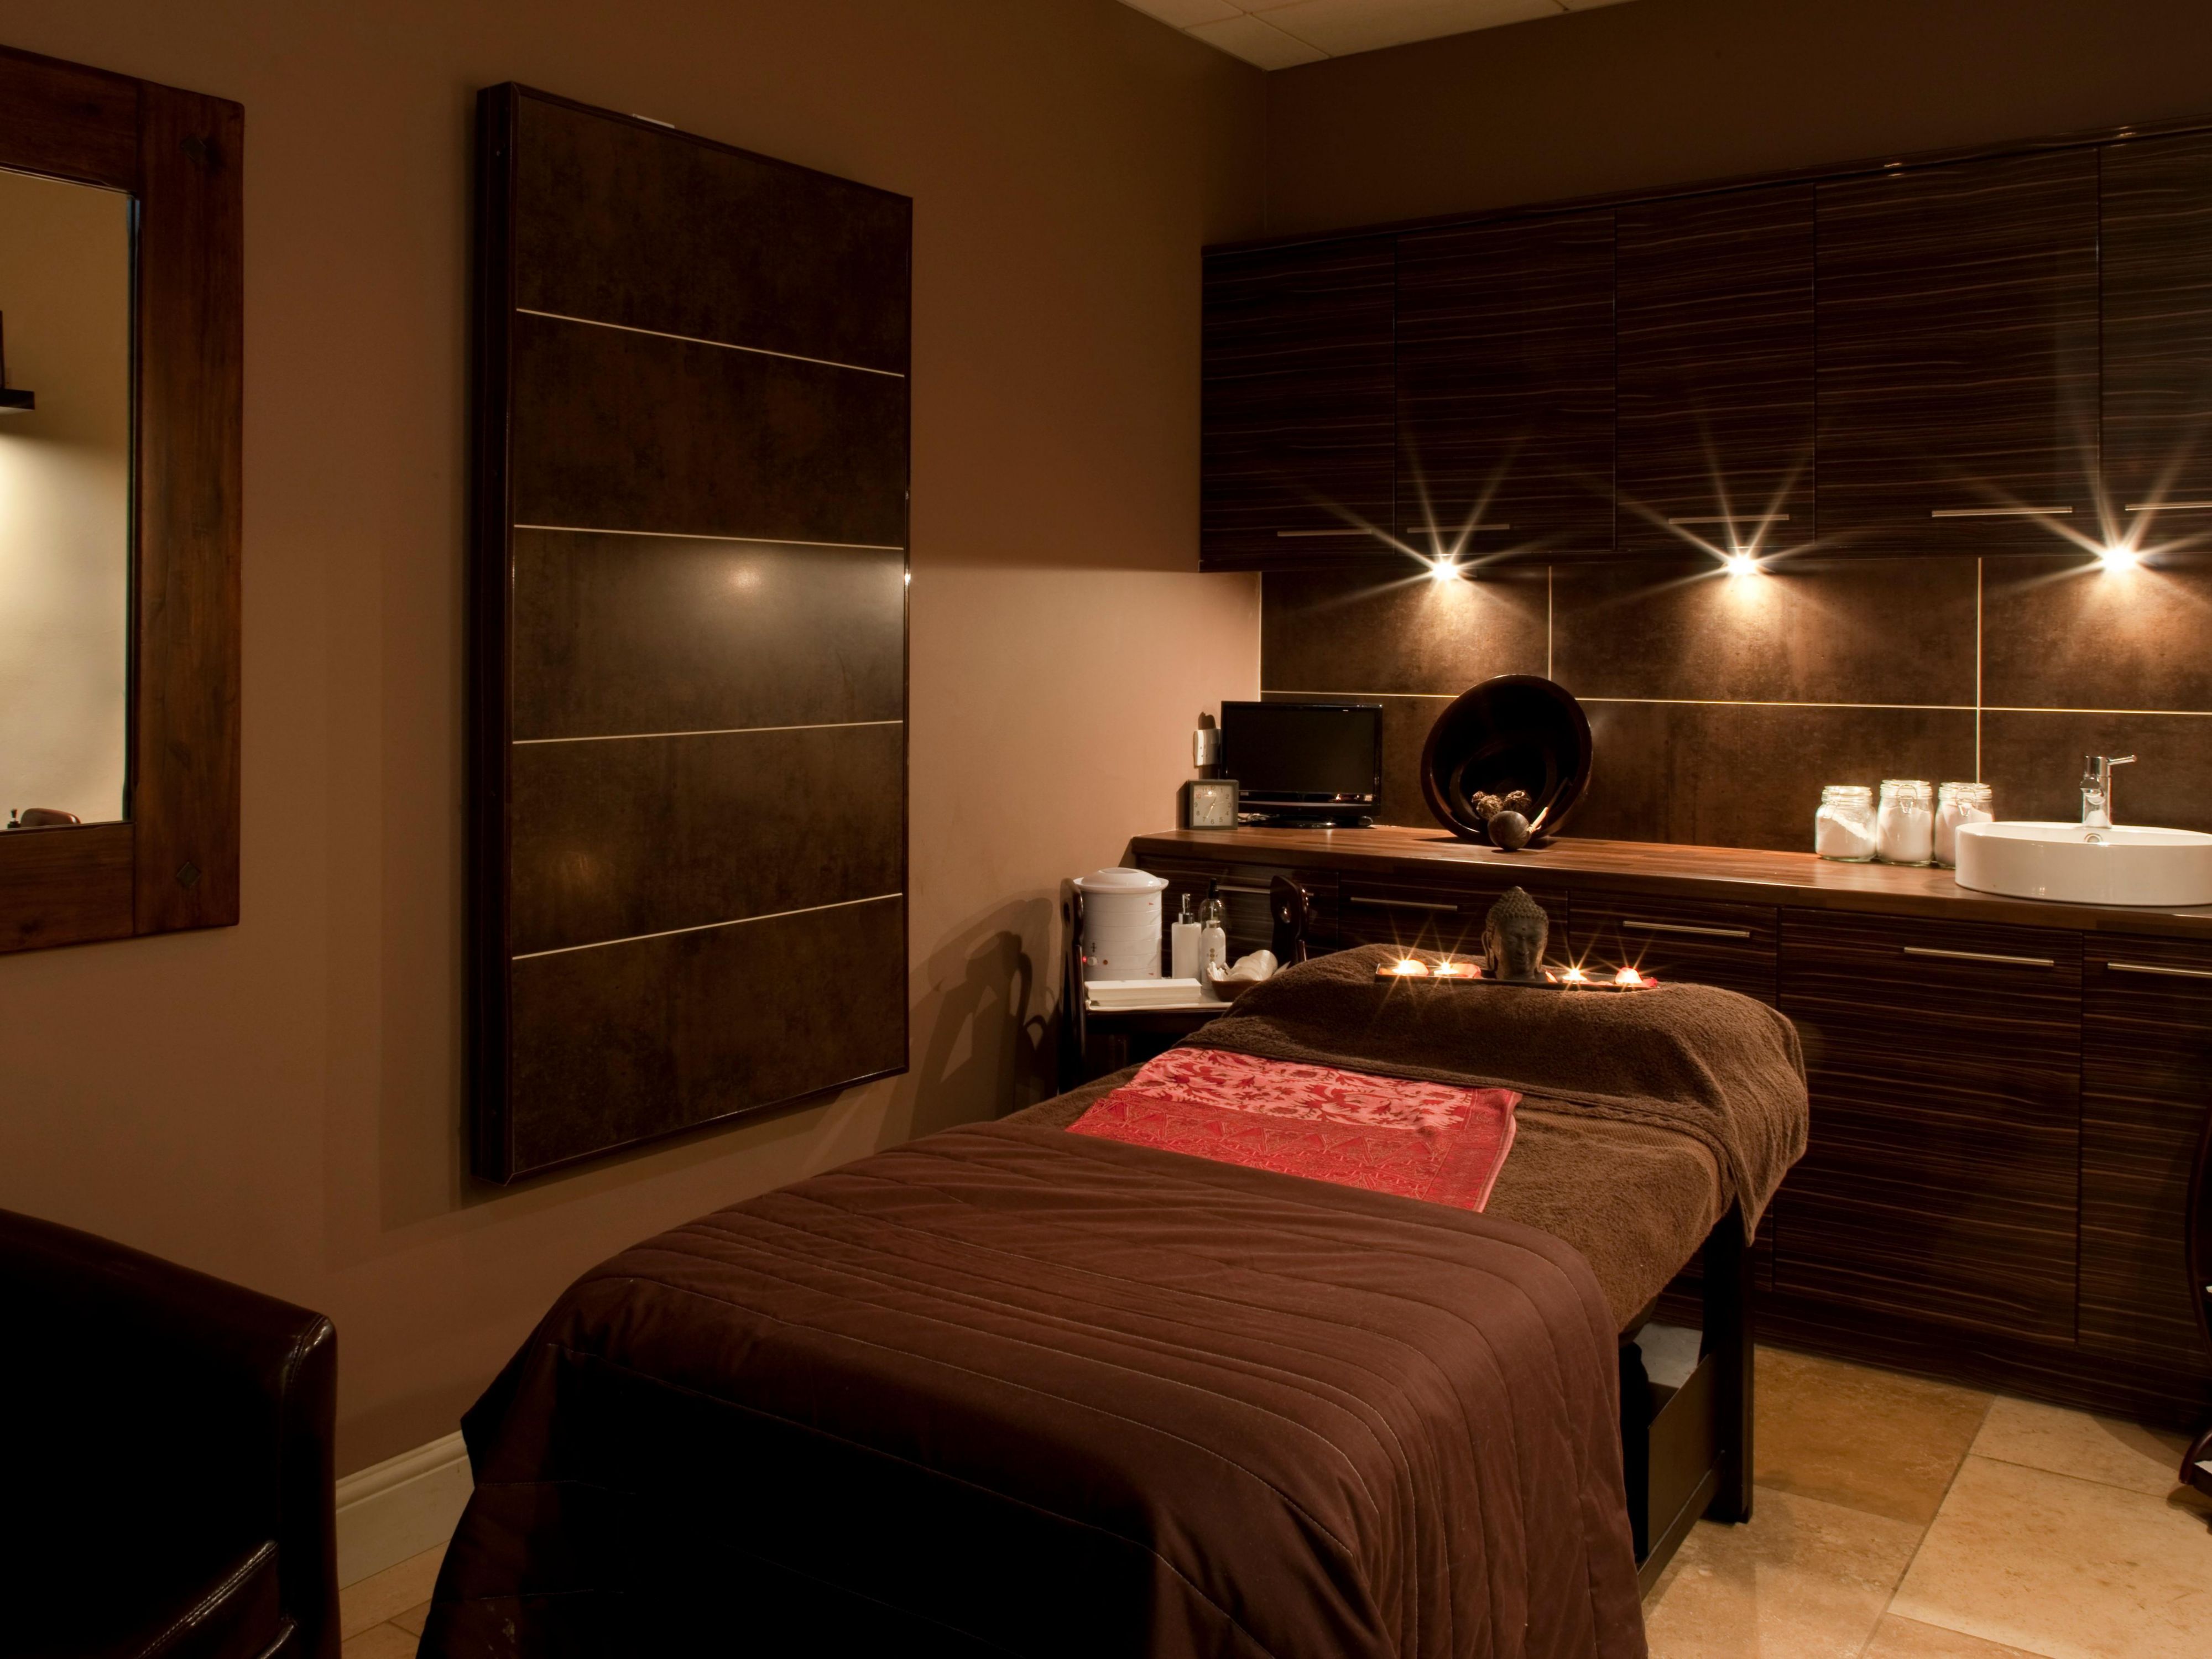 Spa Room - RO Skin at our Club Moativation